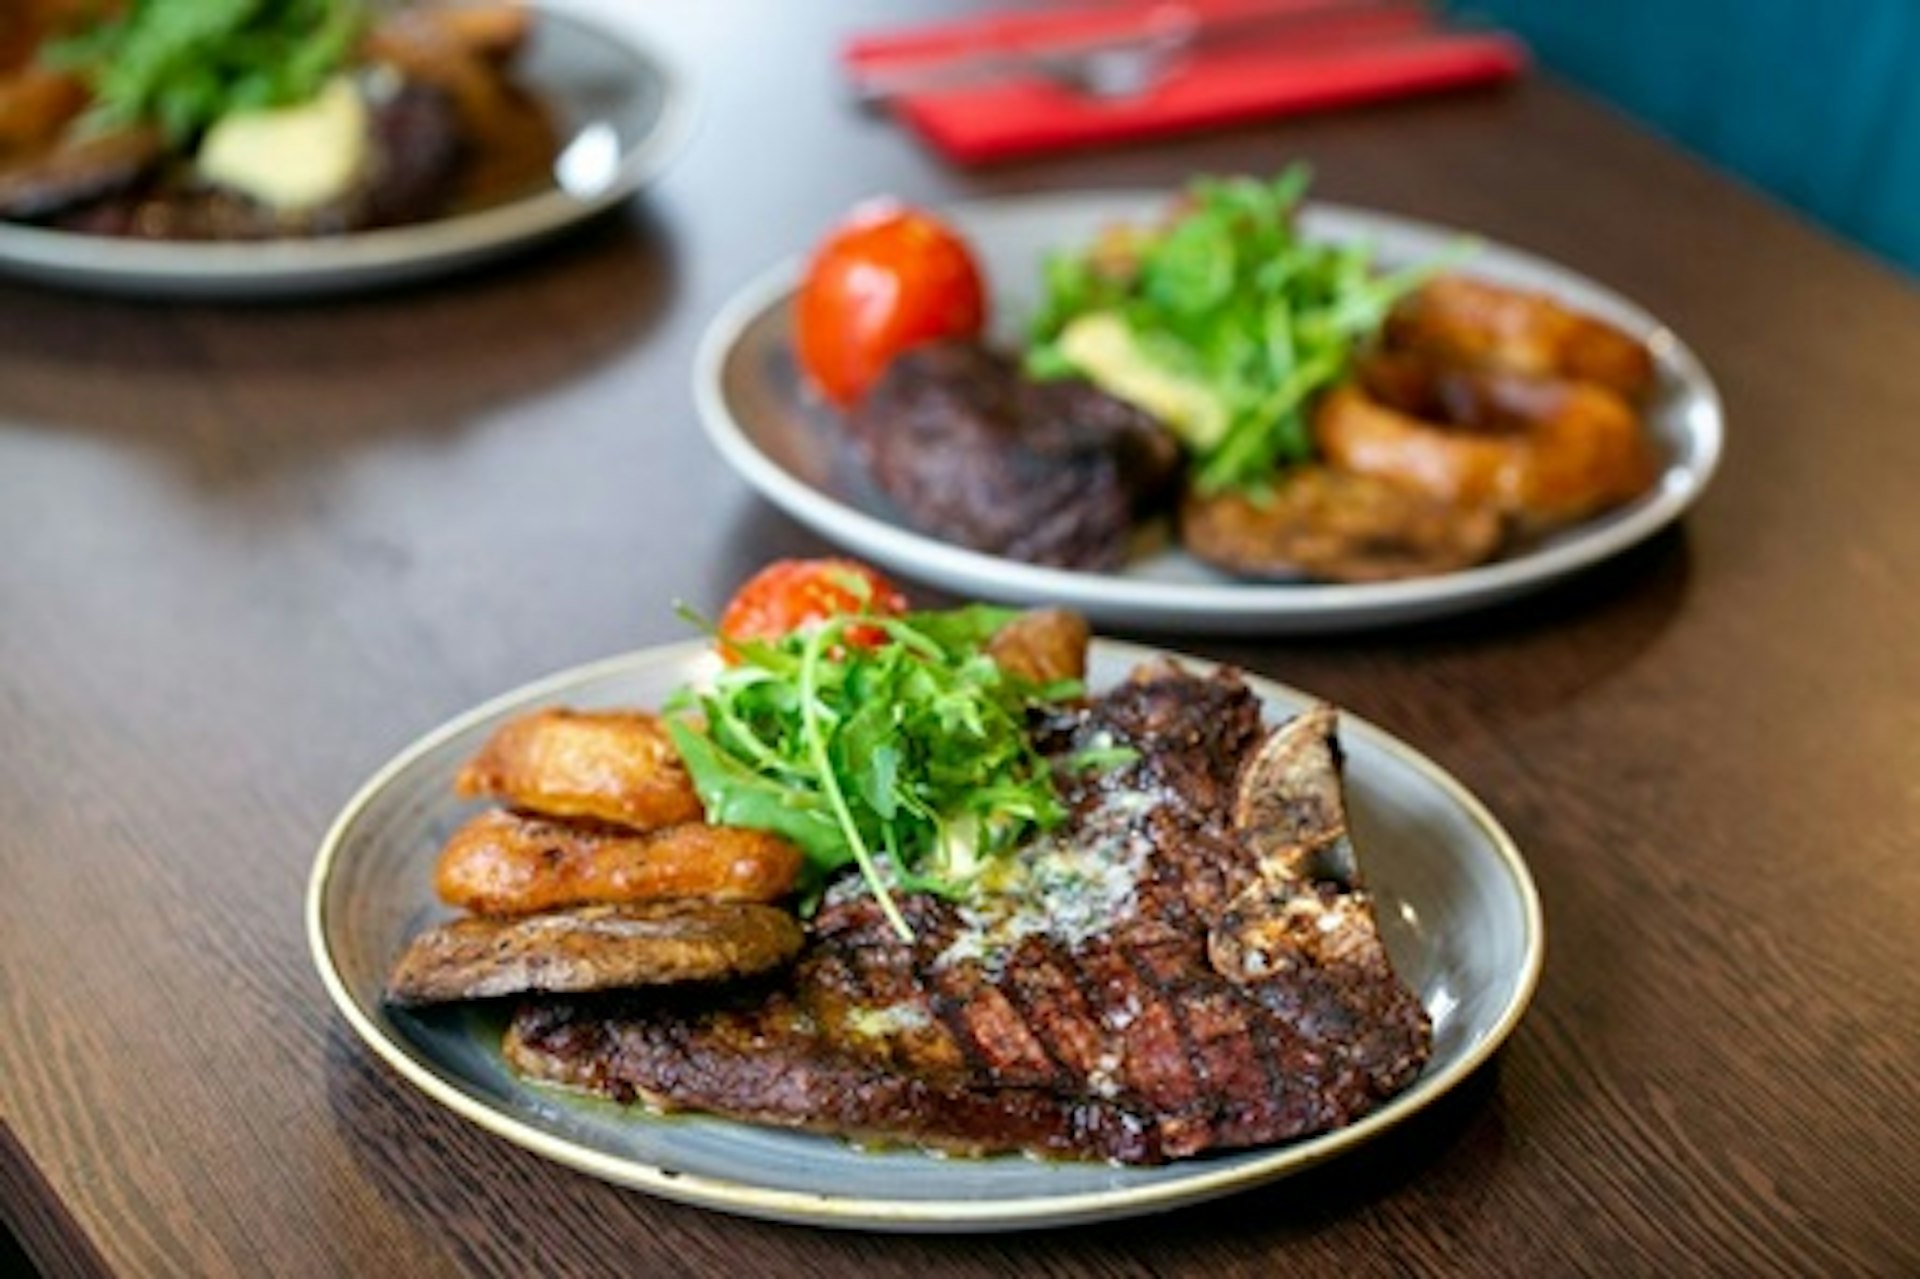 Two Course Steak Dinner for Two with a Bottle of Wine at Trafford Hall Hotel 1